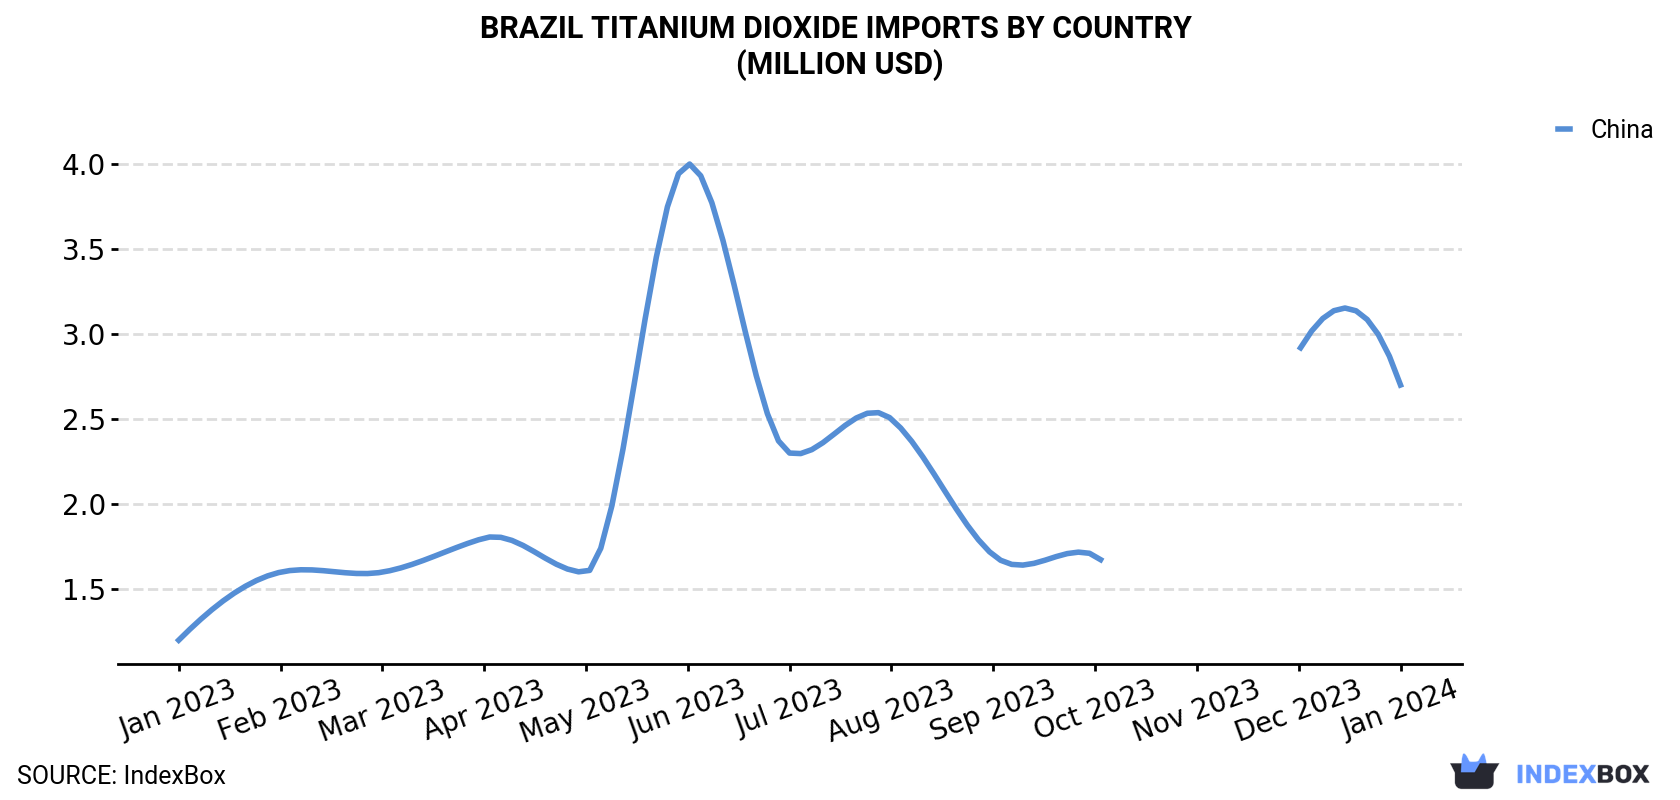 Brazil Titanium Dioxide Imports By Country (Million USD)